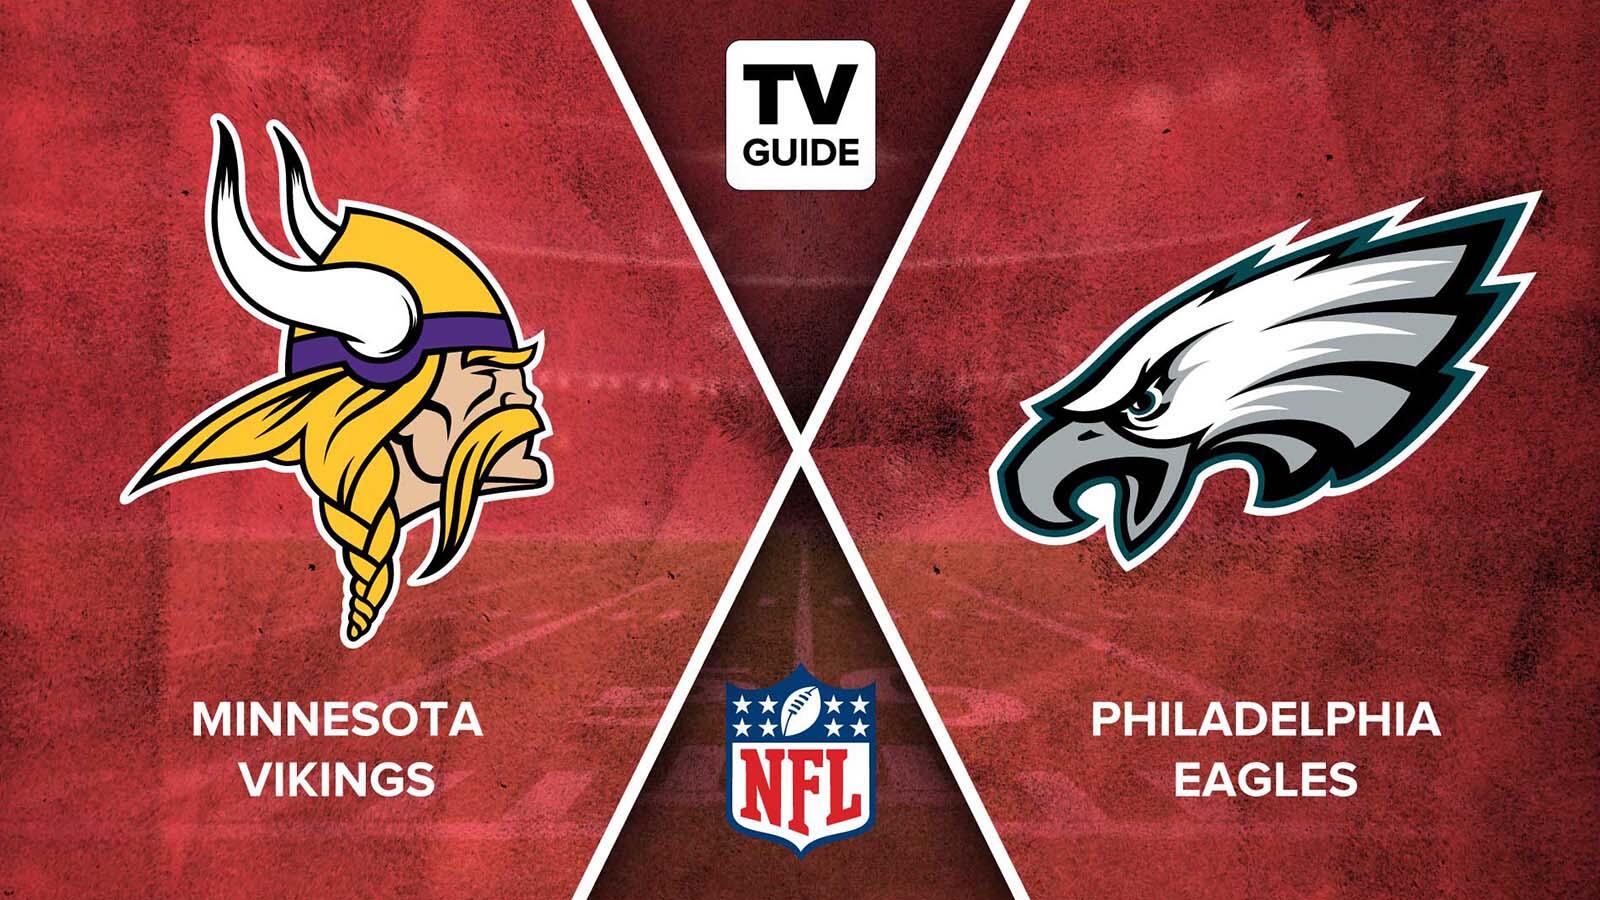 How to Watch MNF Vikings vs. Eagles Live on 09/19 - TV Guide